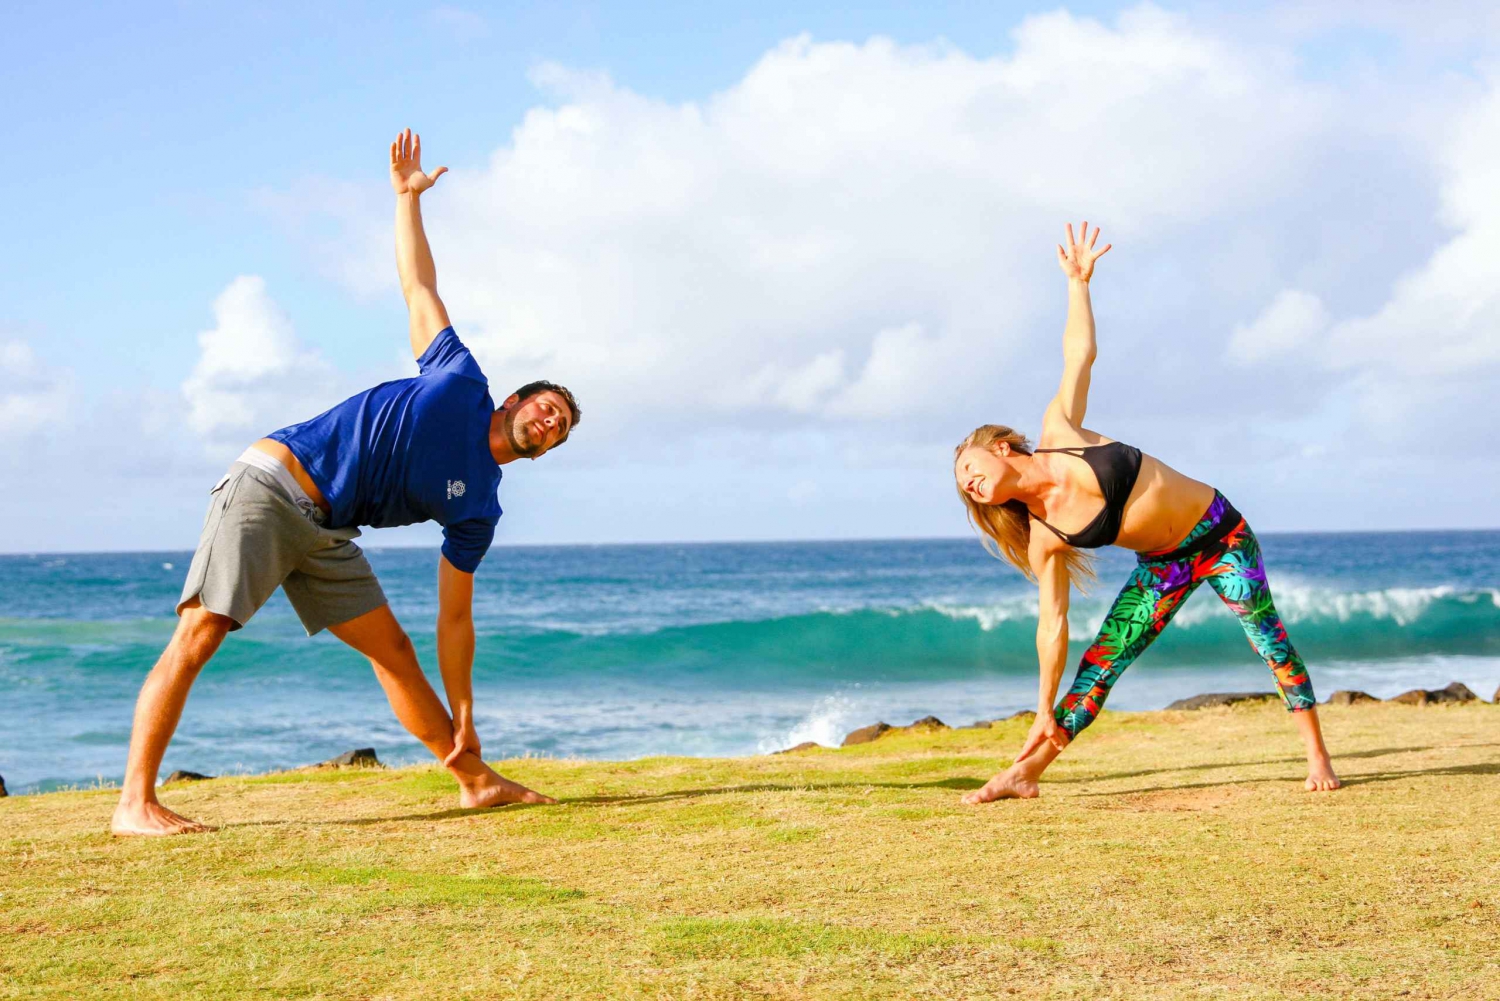 Kauai: Private Yoga Session with Certified Instructor